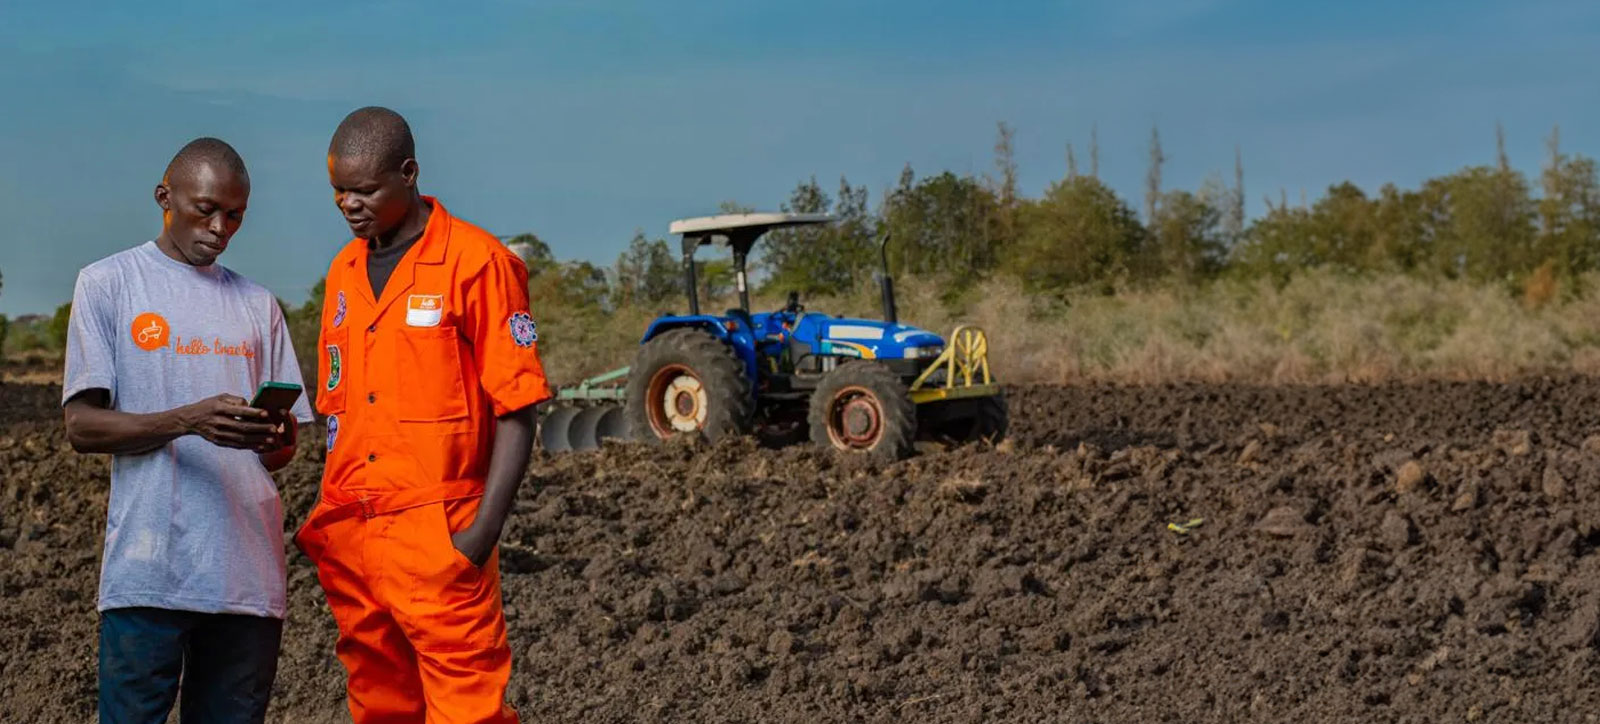 A Hello Tractor rep introduces a farmer to the start-up